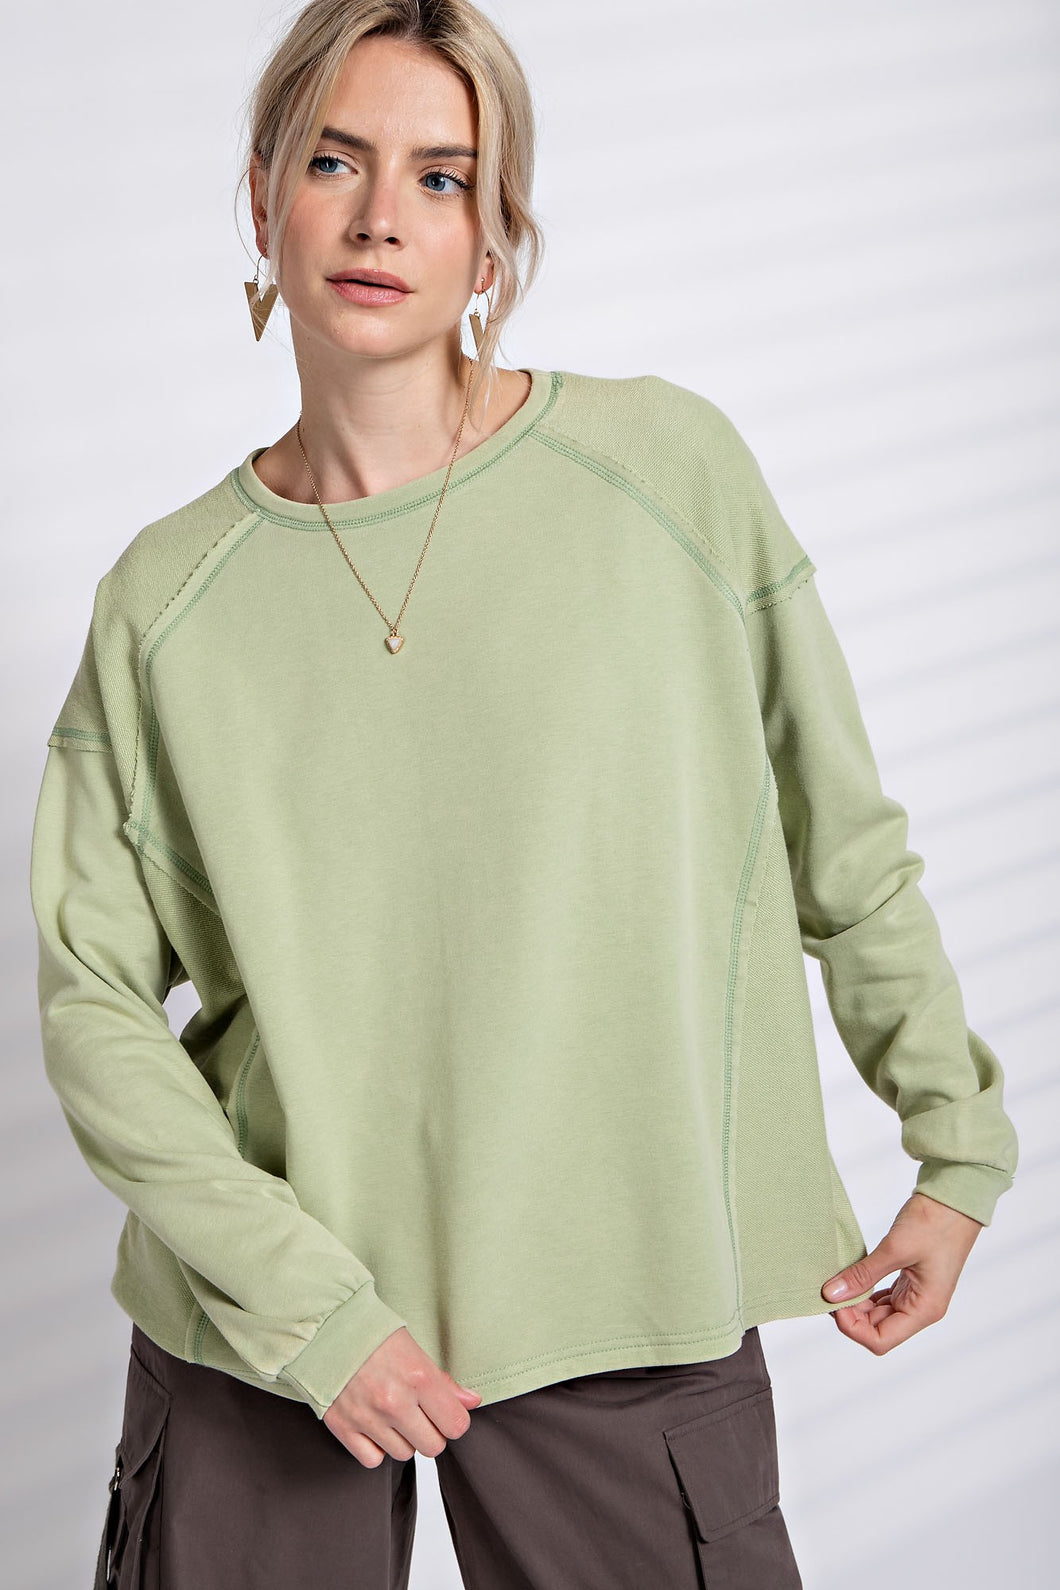 Easel Inside Out Terry Knit Top in Faded Sage Shirts & Tops Easel   